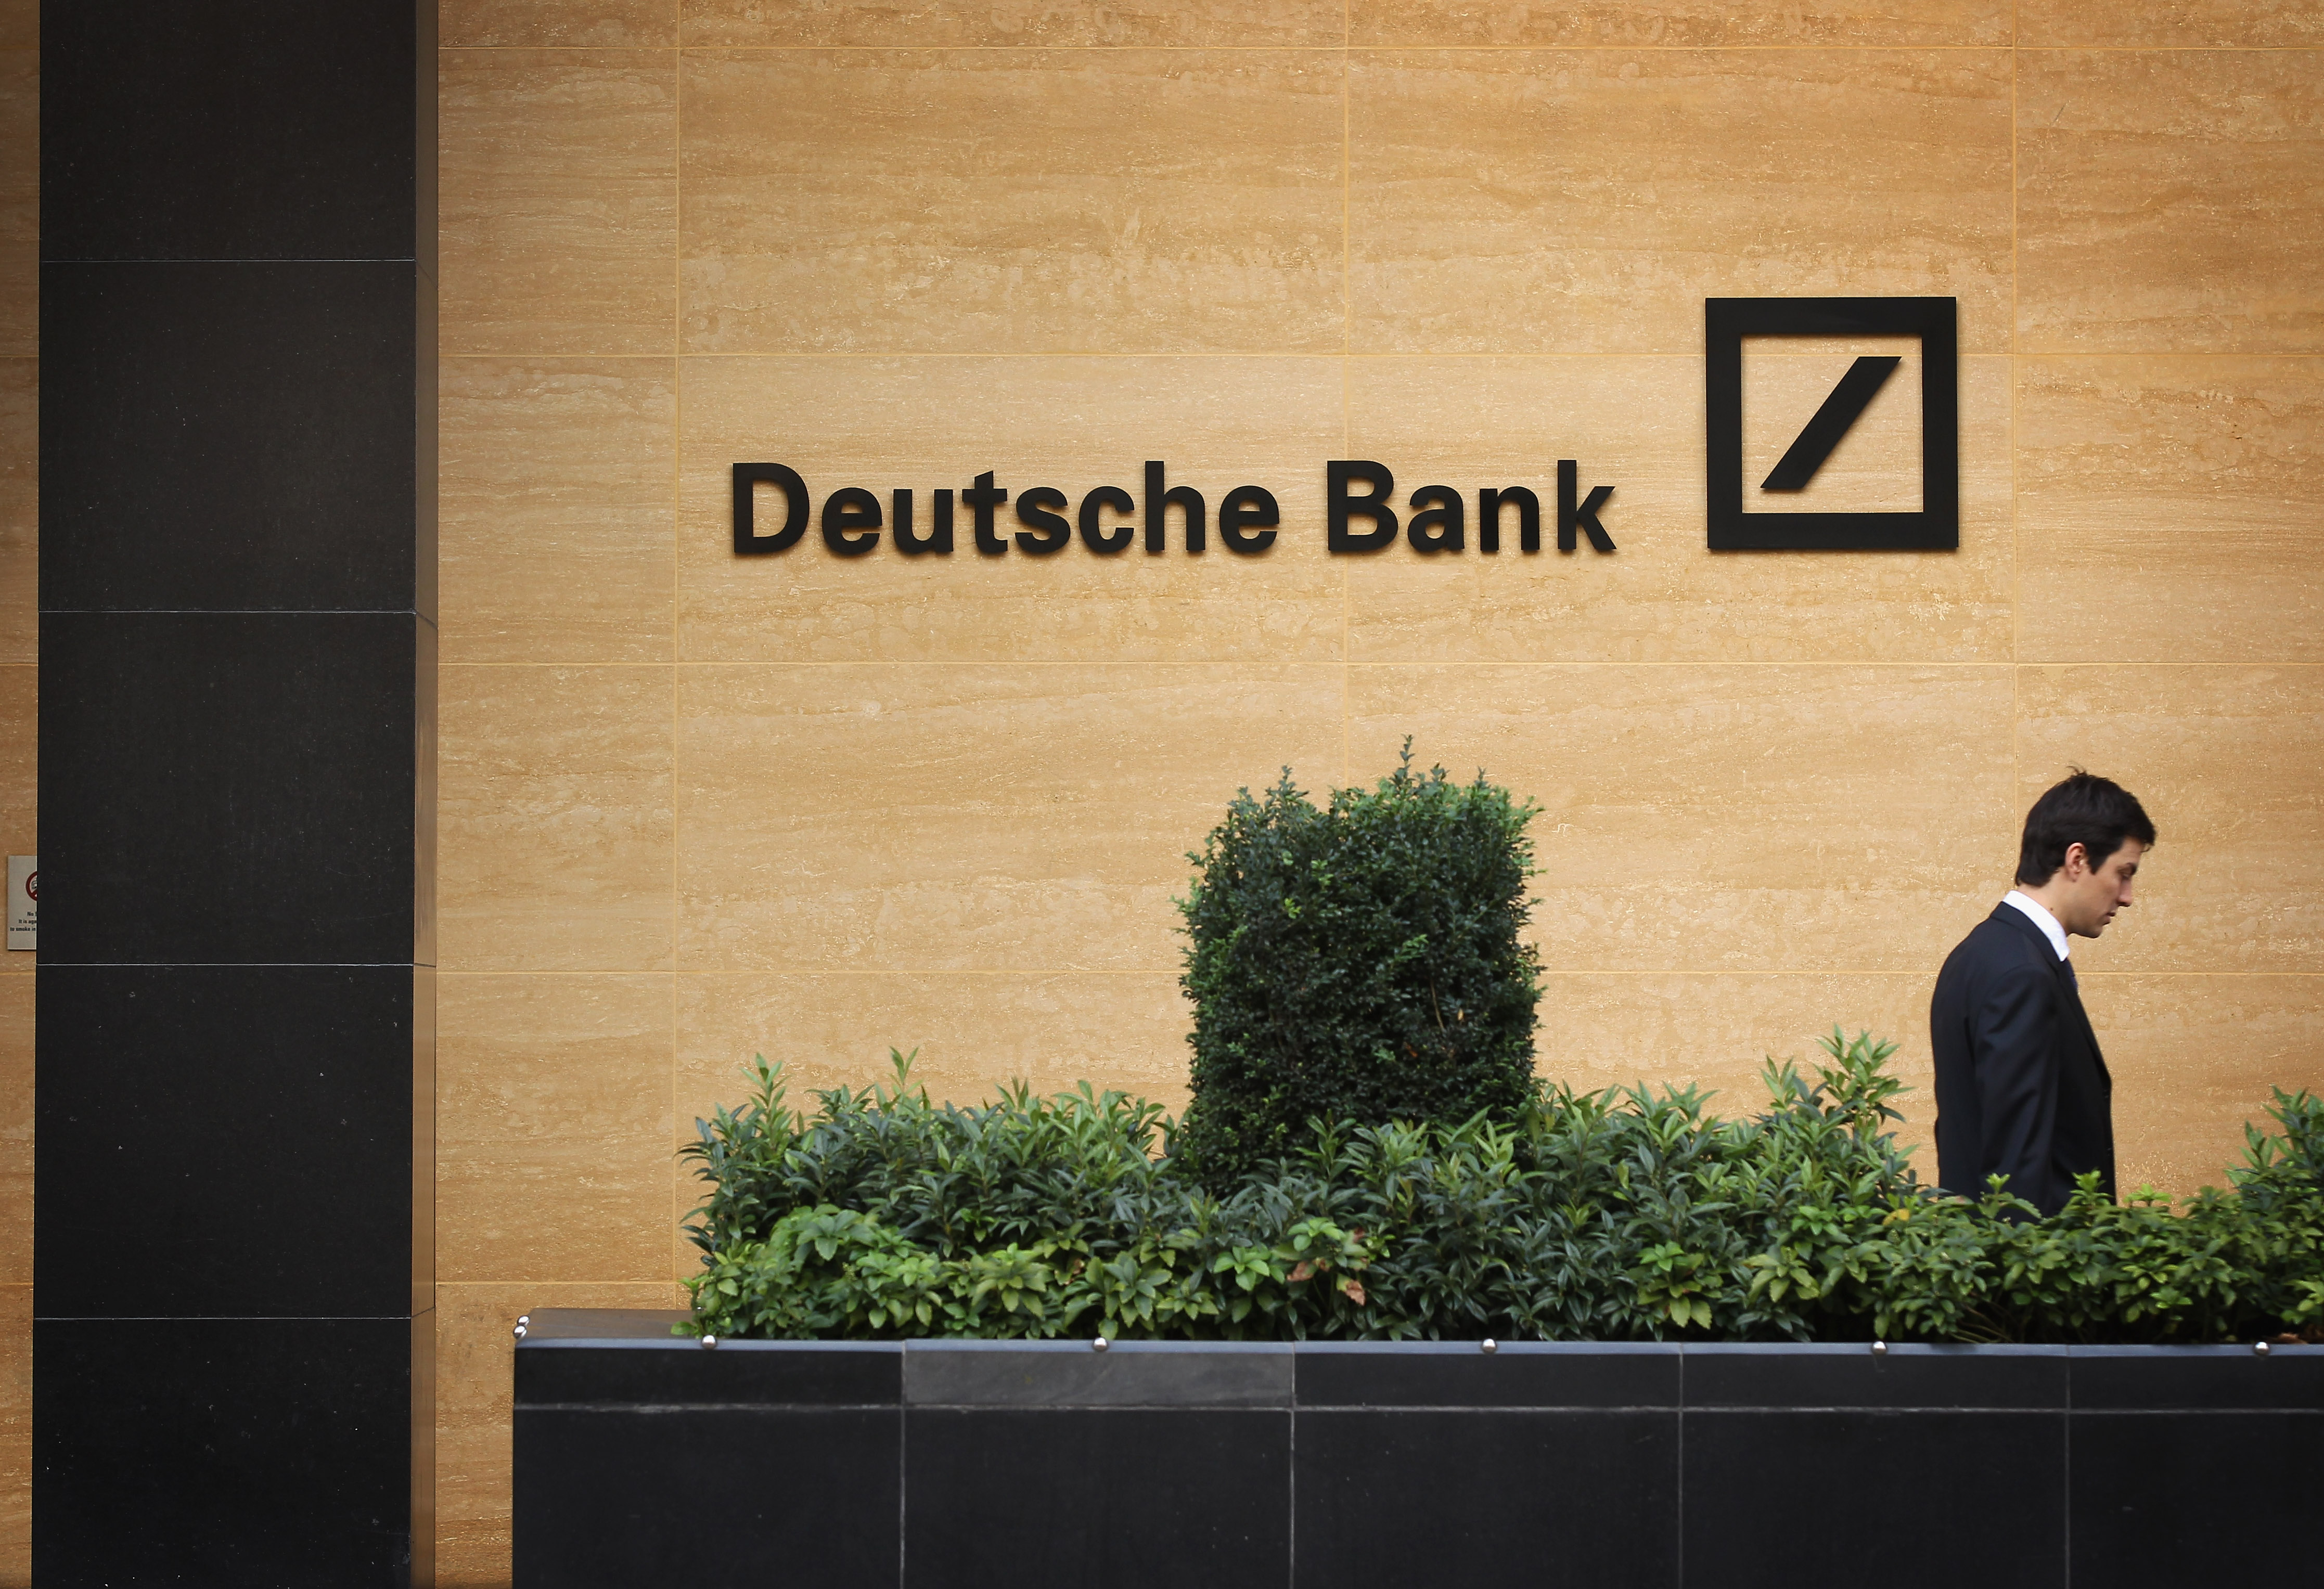 A general view of Deutsche Bank on Sept. 5, 2011 in London. (Dan Kitwood&amp;mdash;Getty Images)